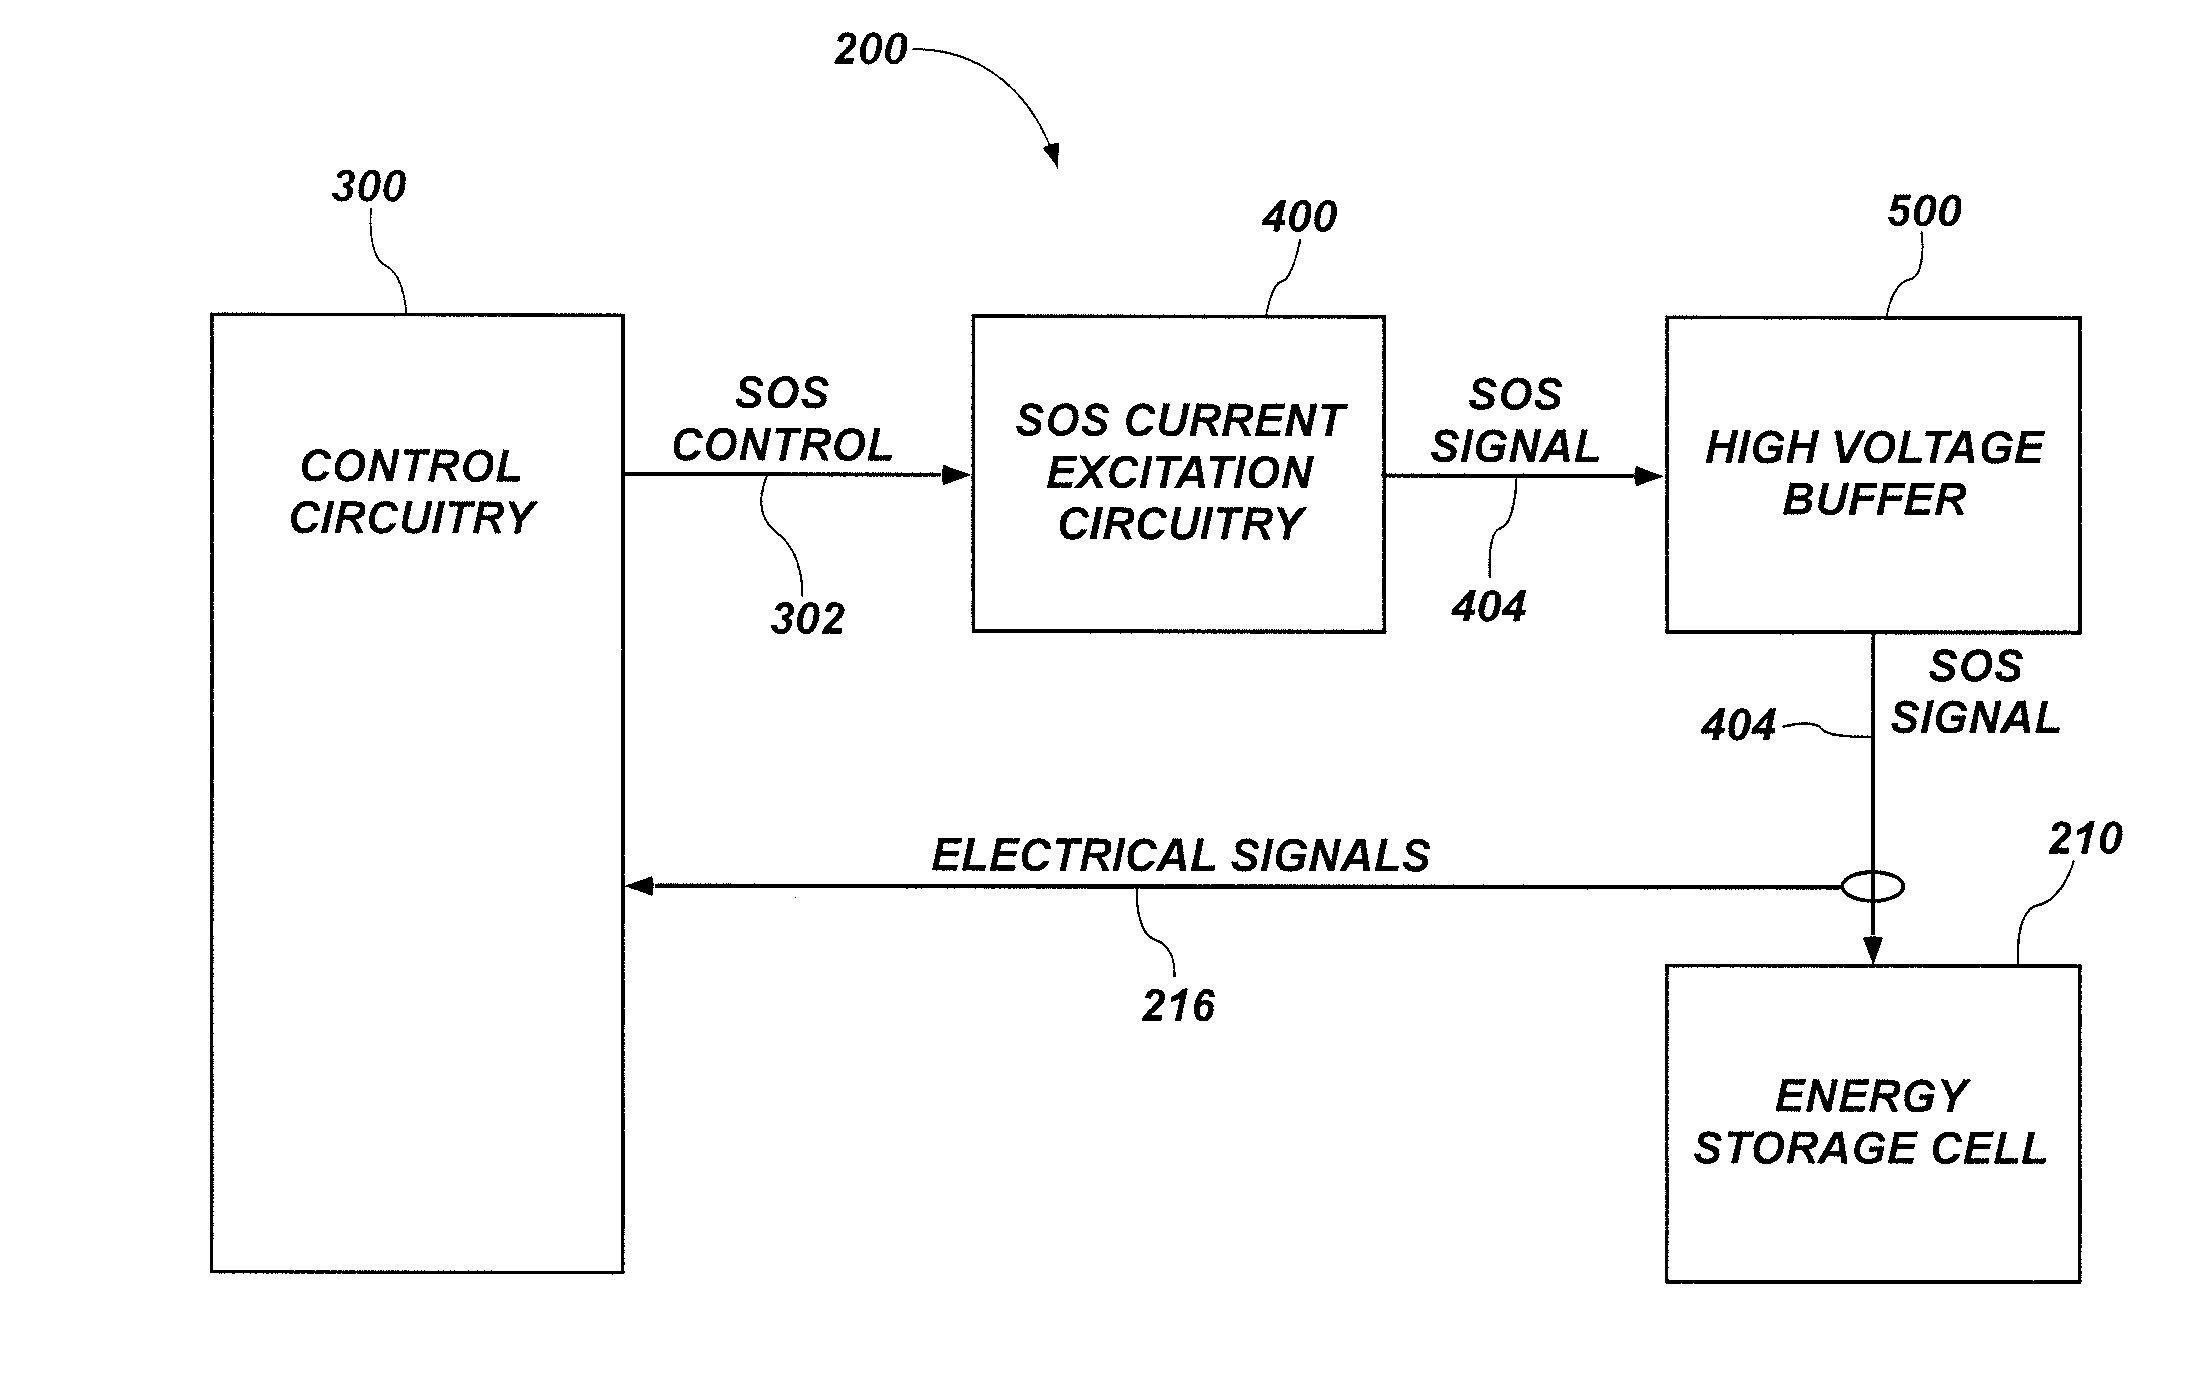 Energy storage cell impedance measuring apparatus, methods and related systems